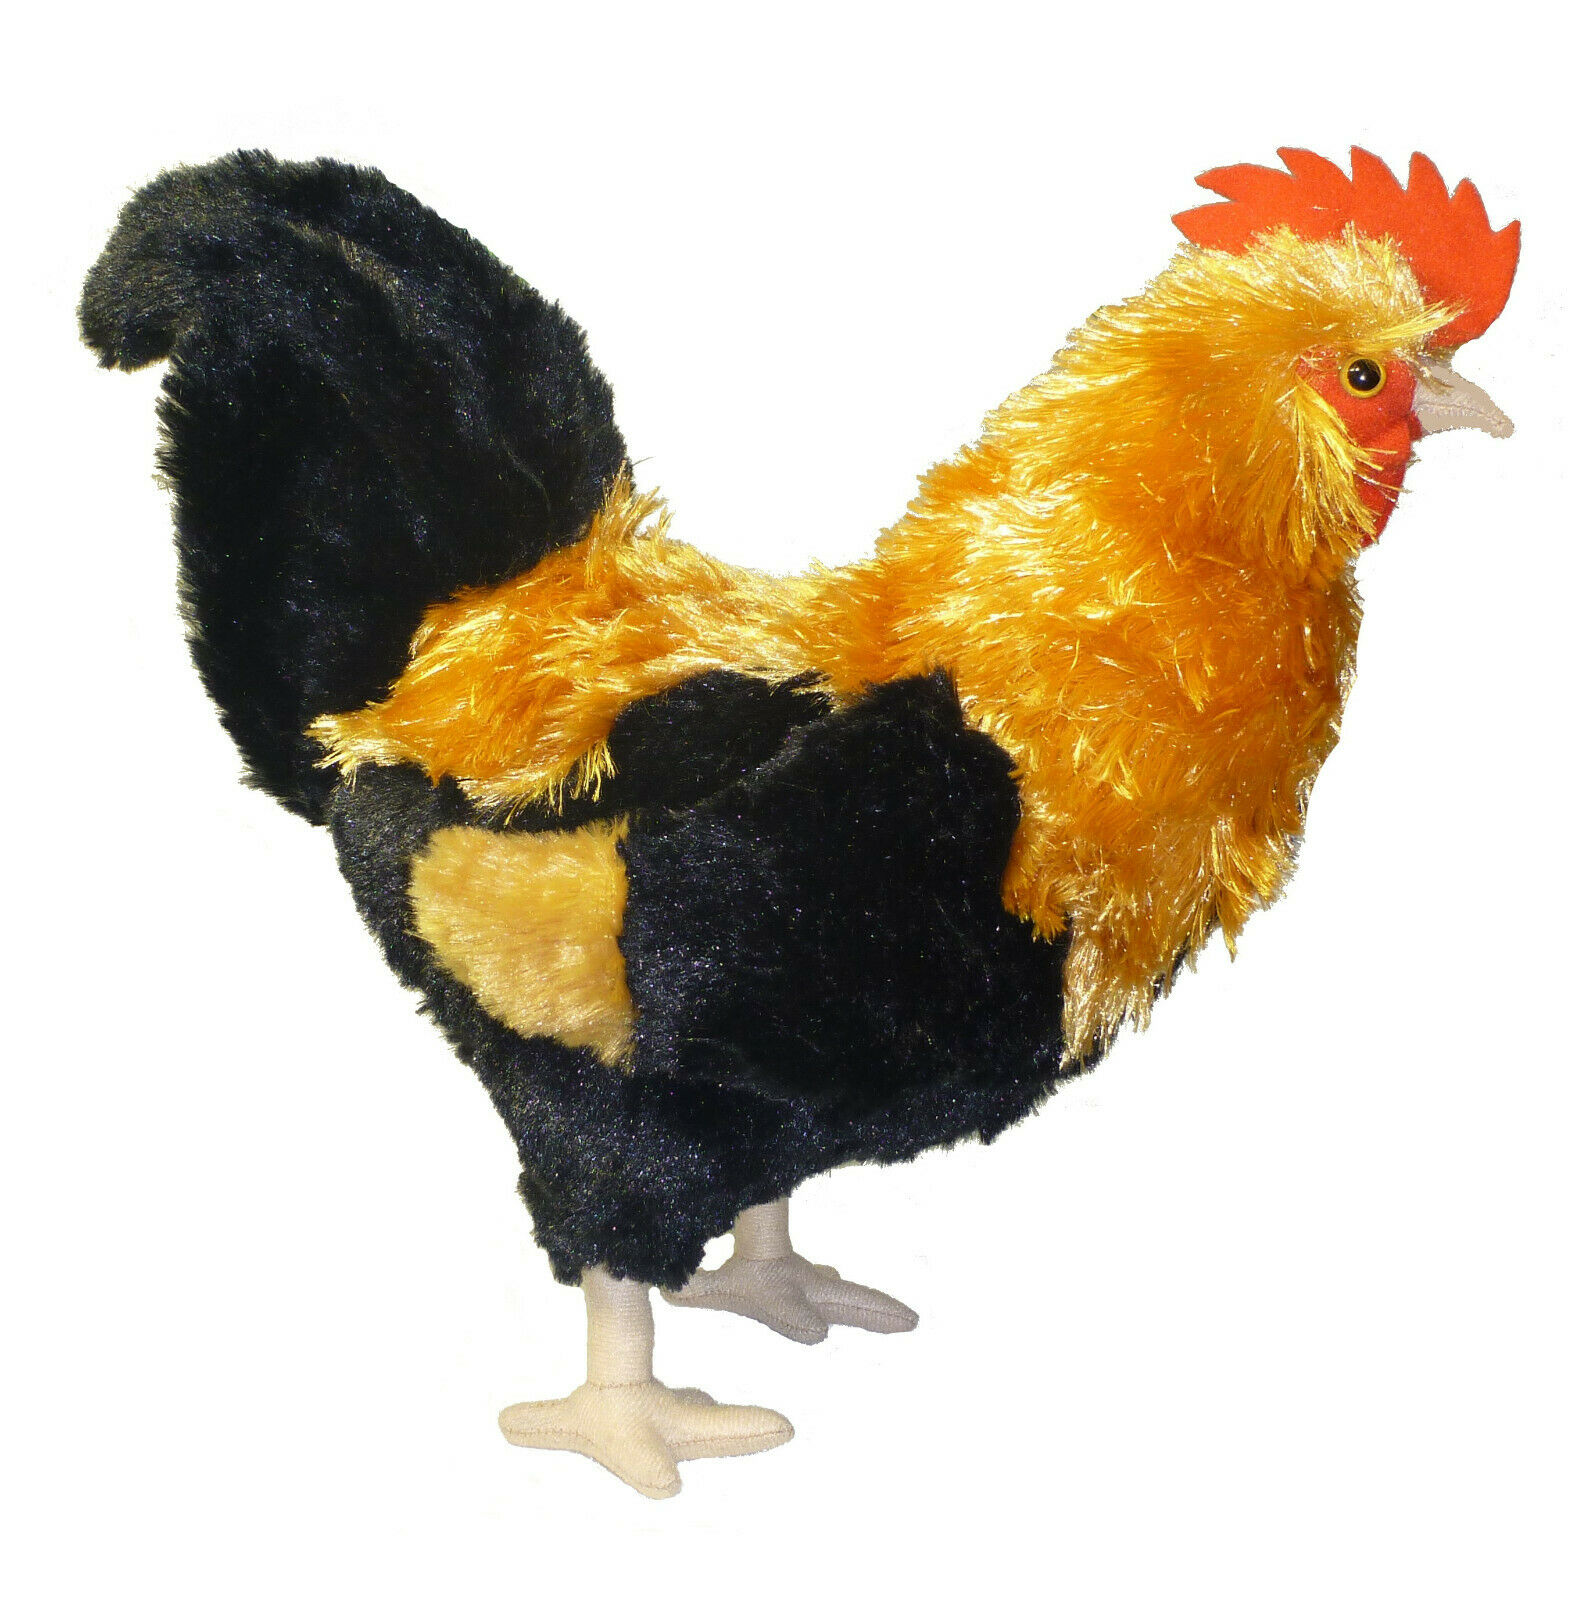 Adore 14" Valiant The Rooster Chicken Stuffed Animal Plush Toy